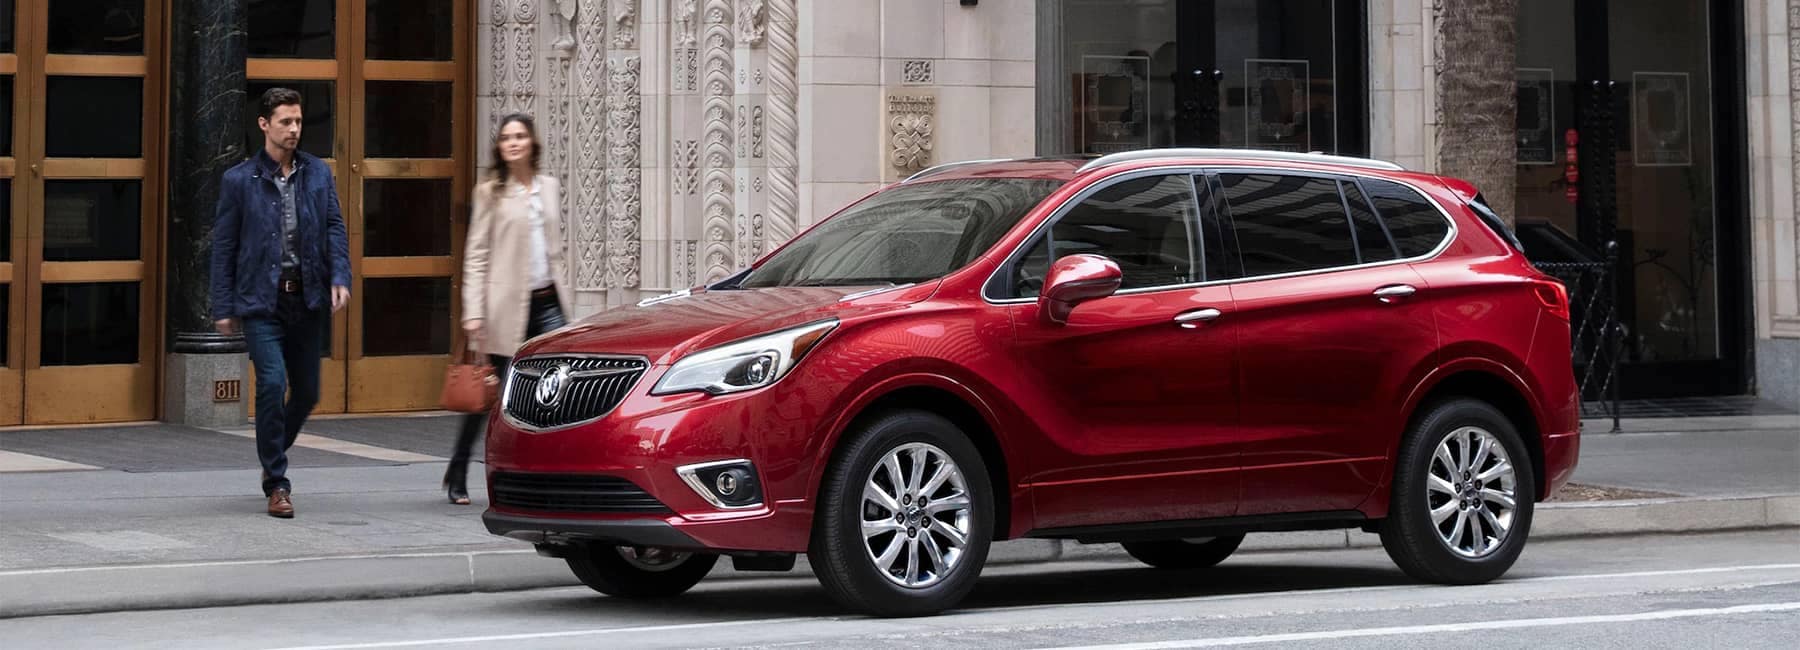 2020 Buick Envision Compact SUV with Man and Woman Walking